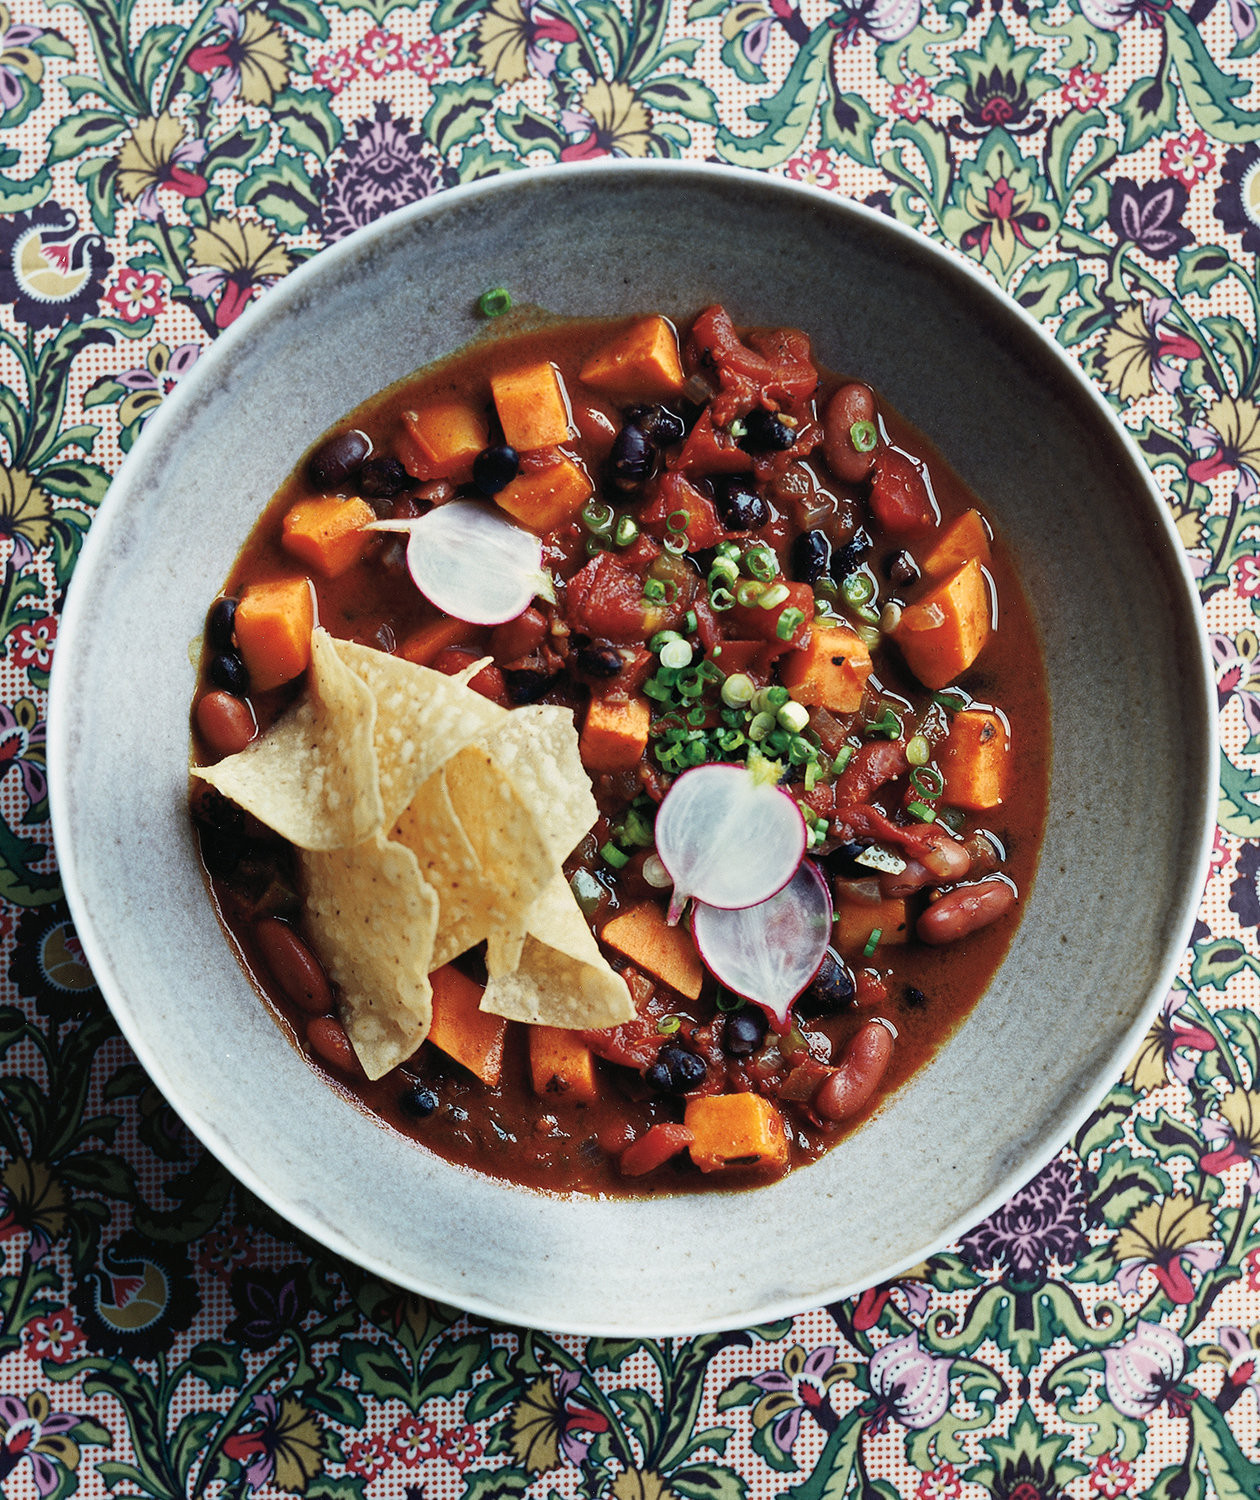 Slow Cooker Vegetarian Chili With Sweet Potatoes
 Slow Cooker Ve arian Chili With Sweet Potatoes Recipe